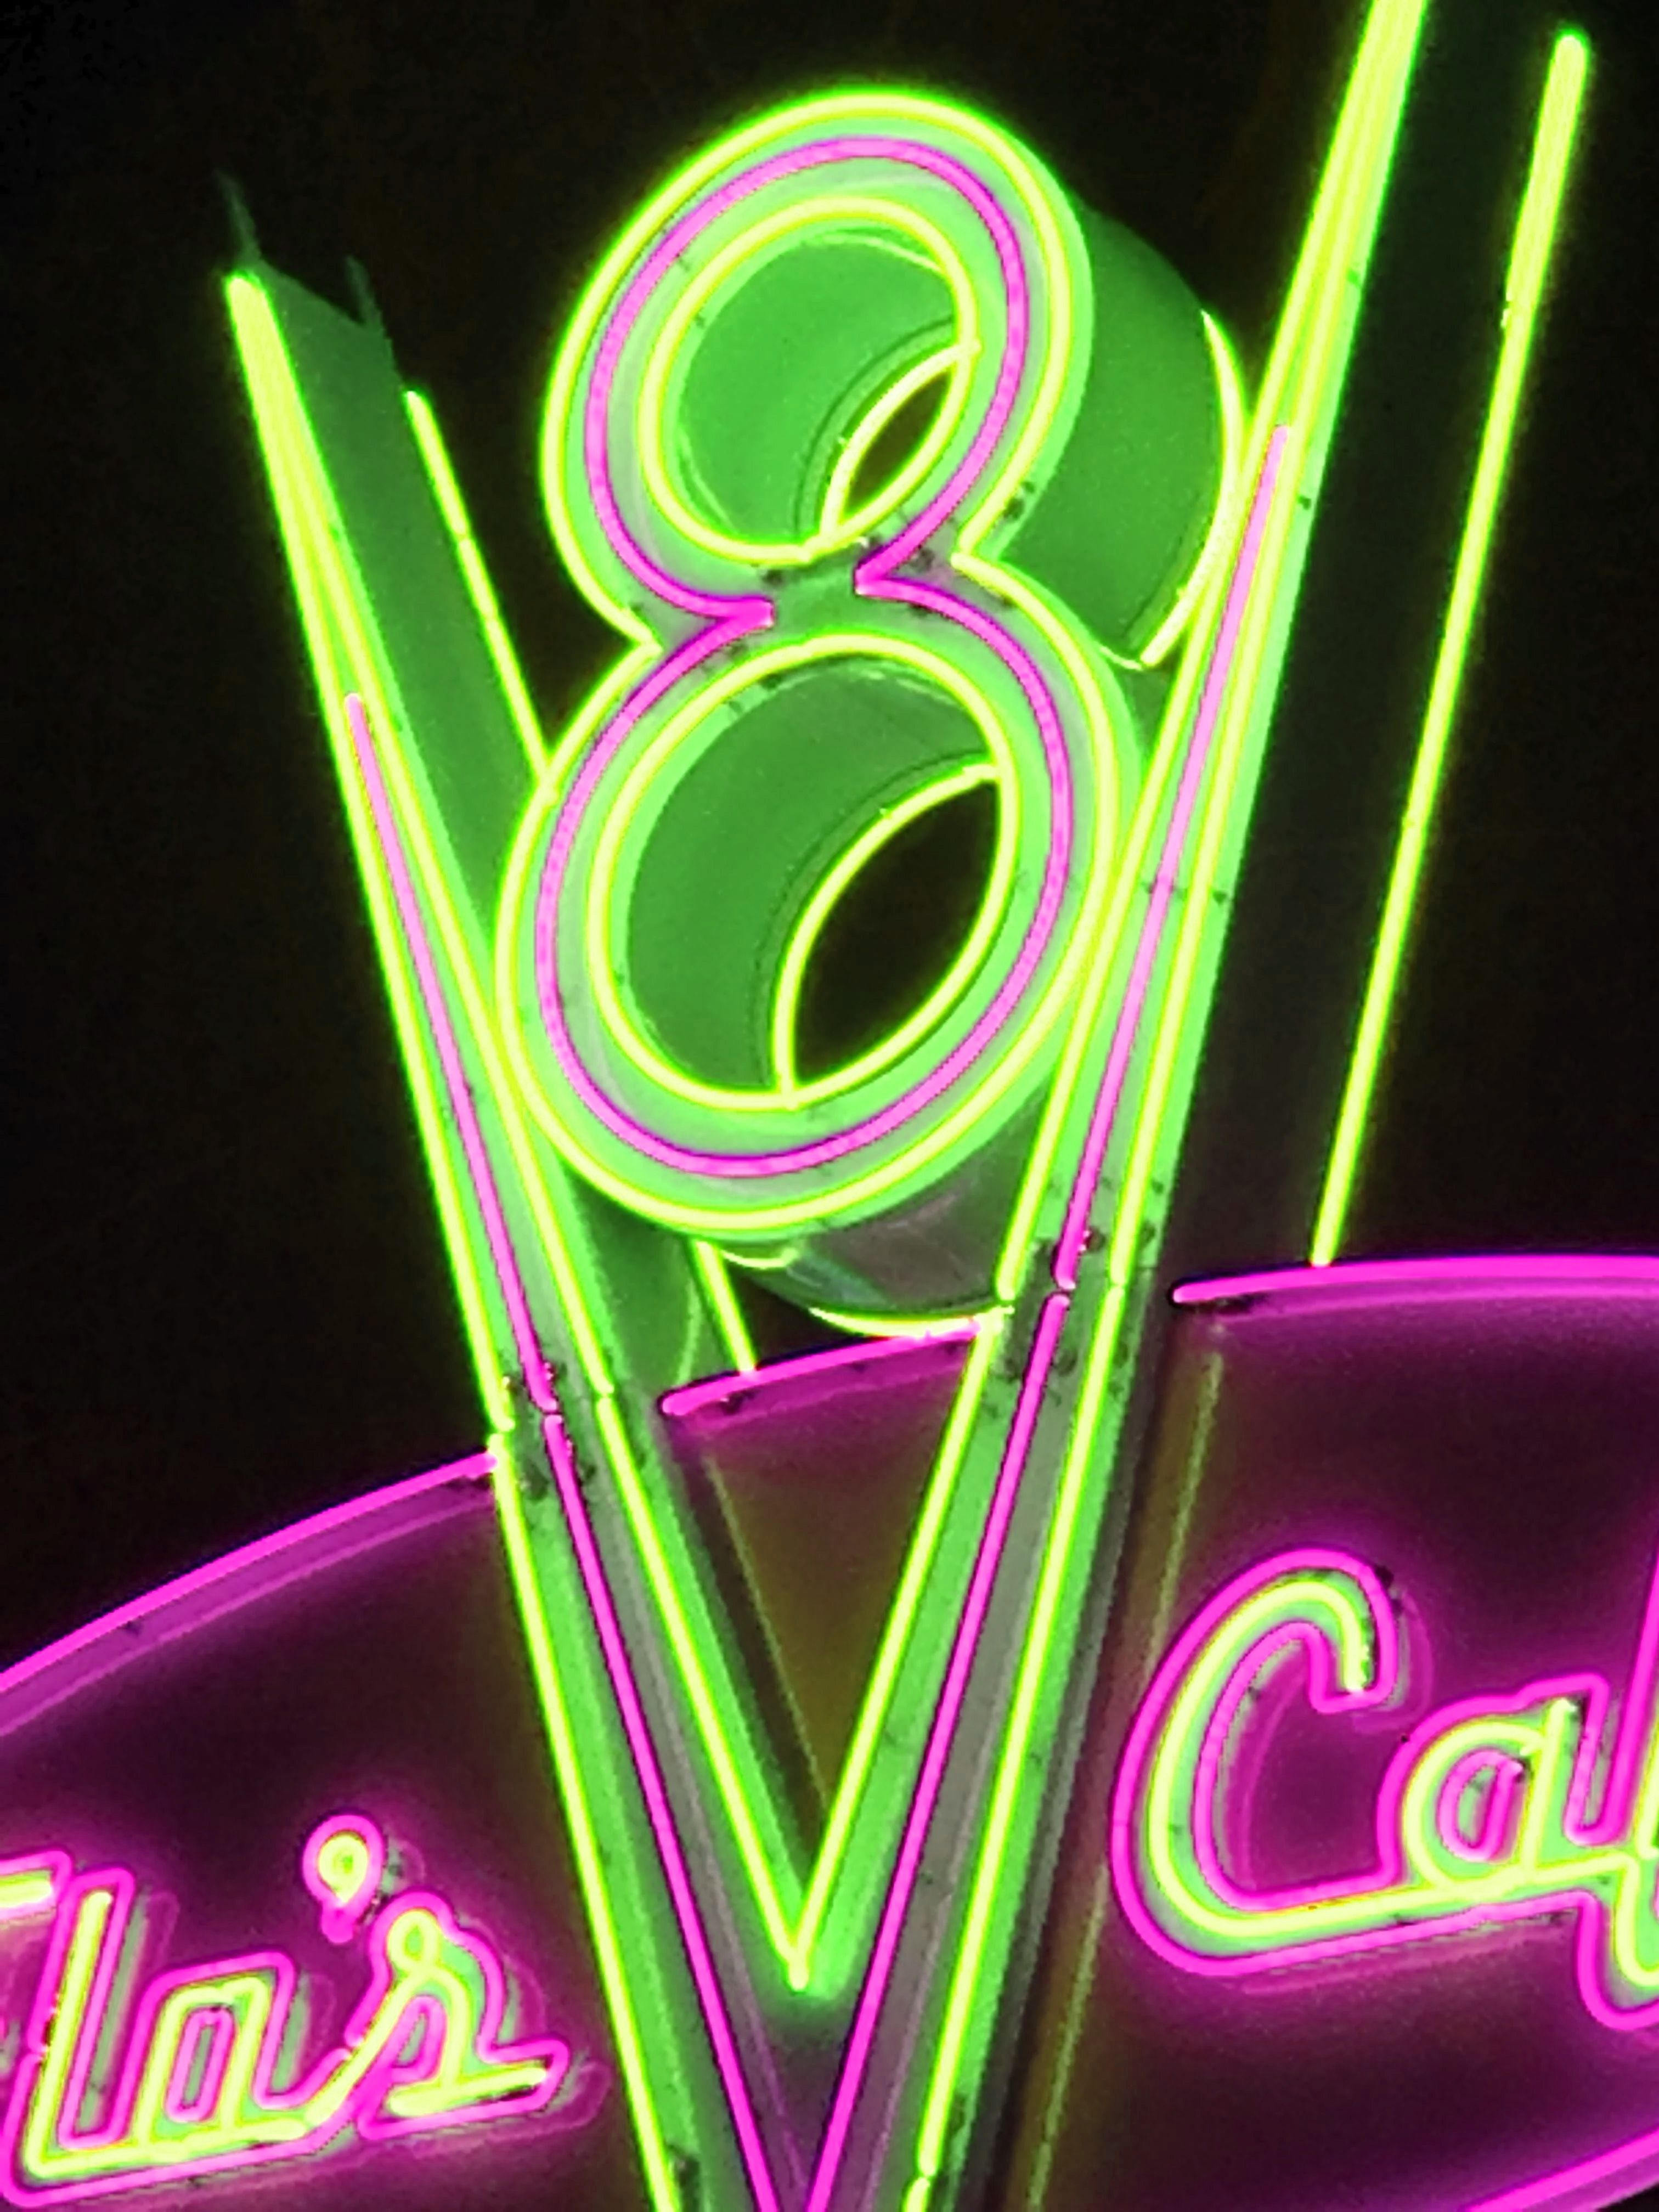 A neon sign that says 